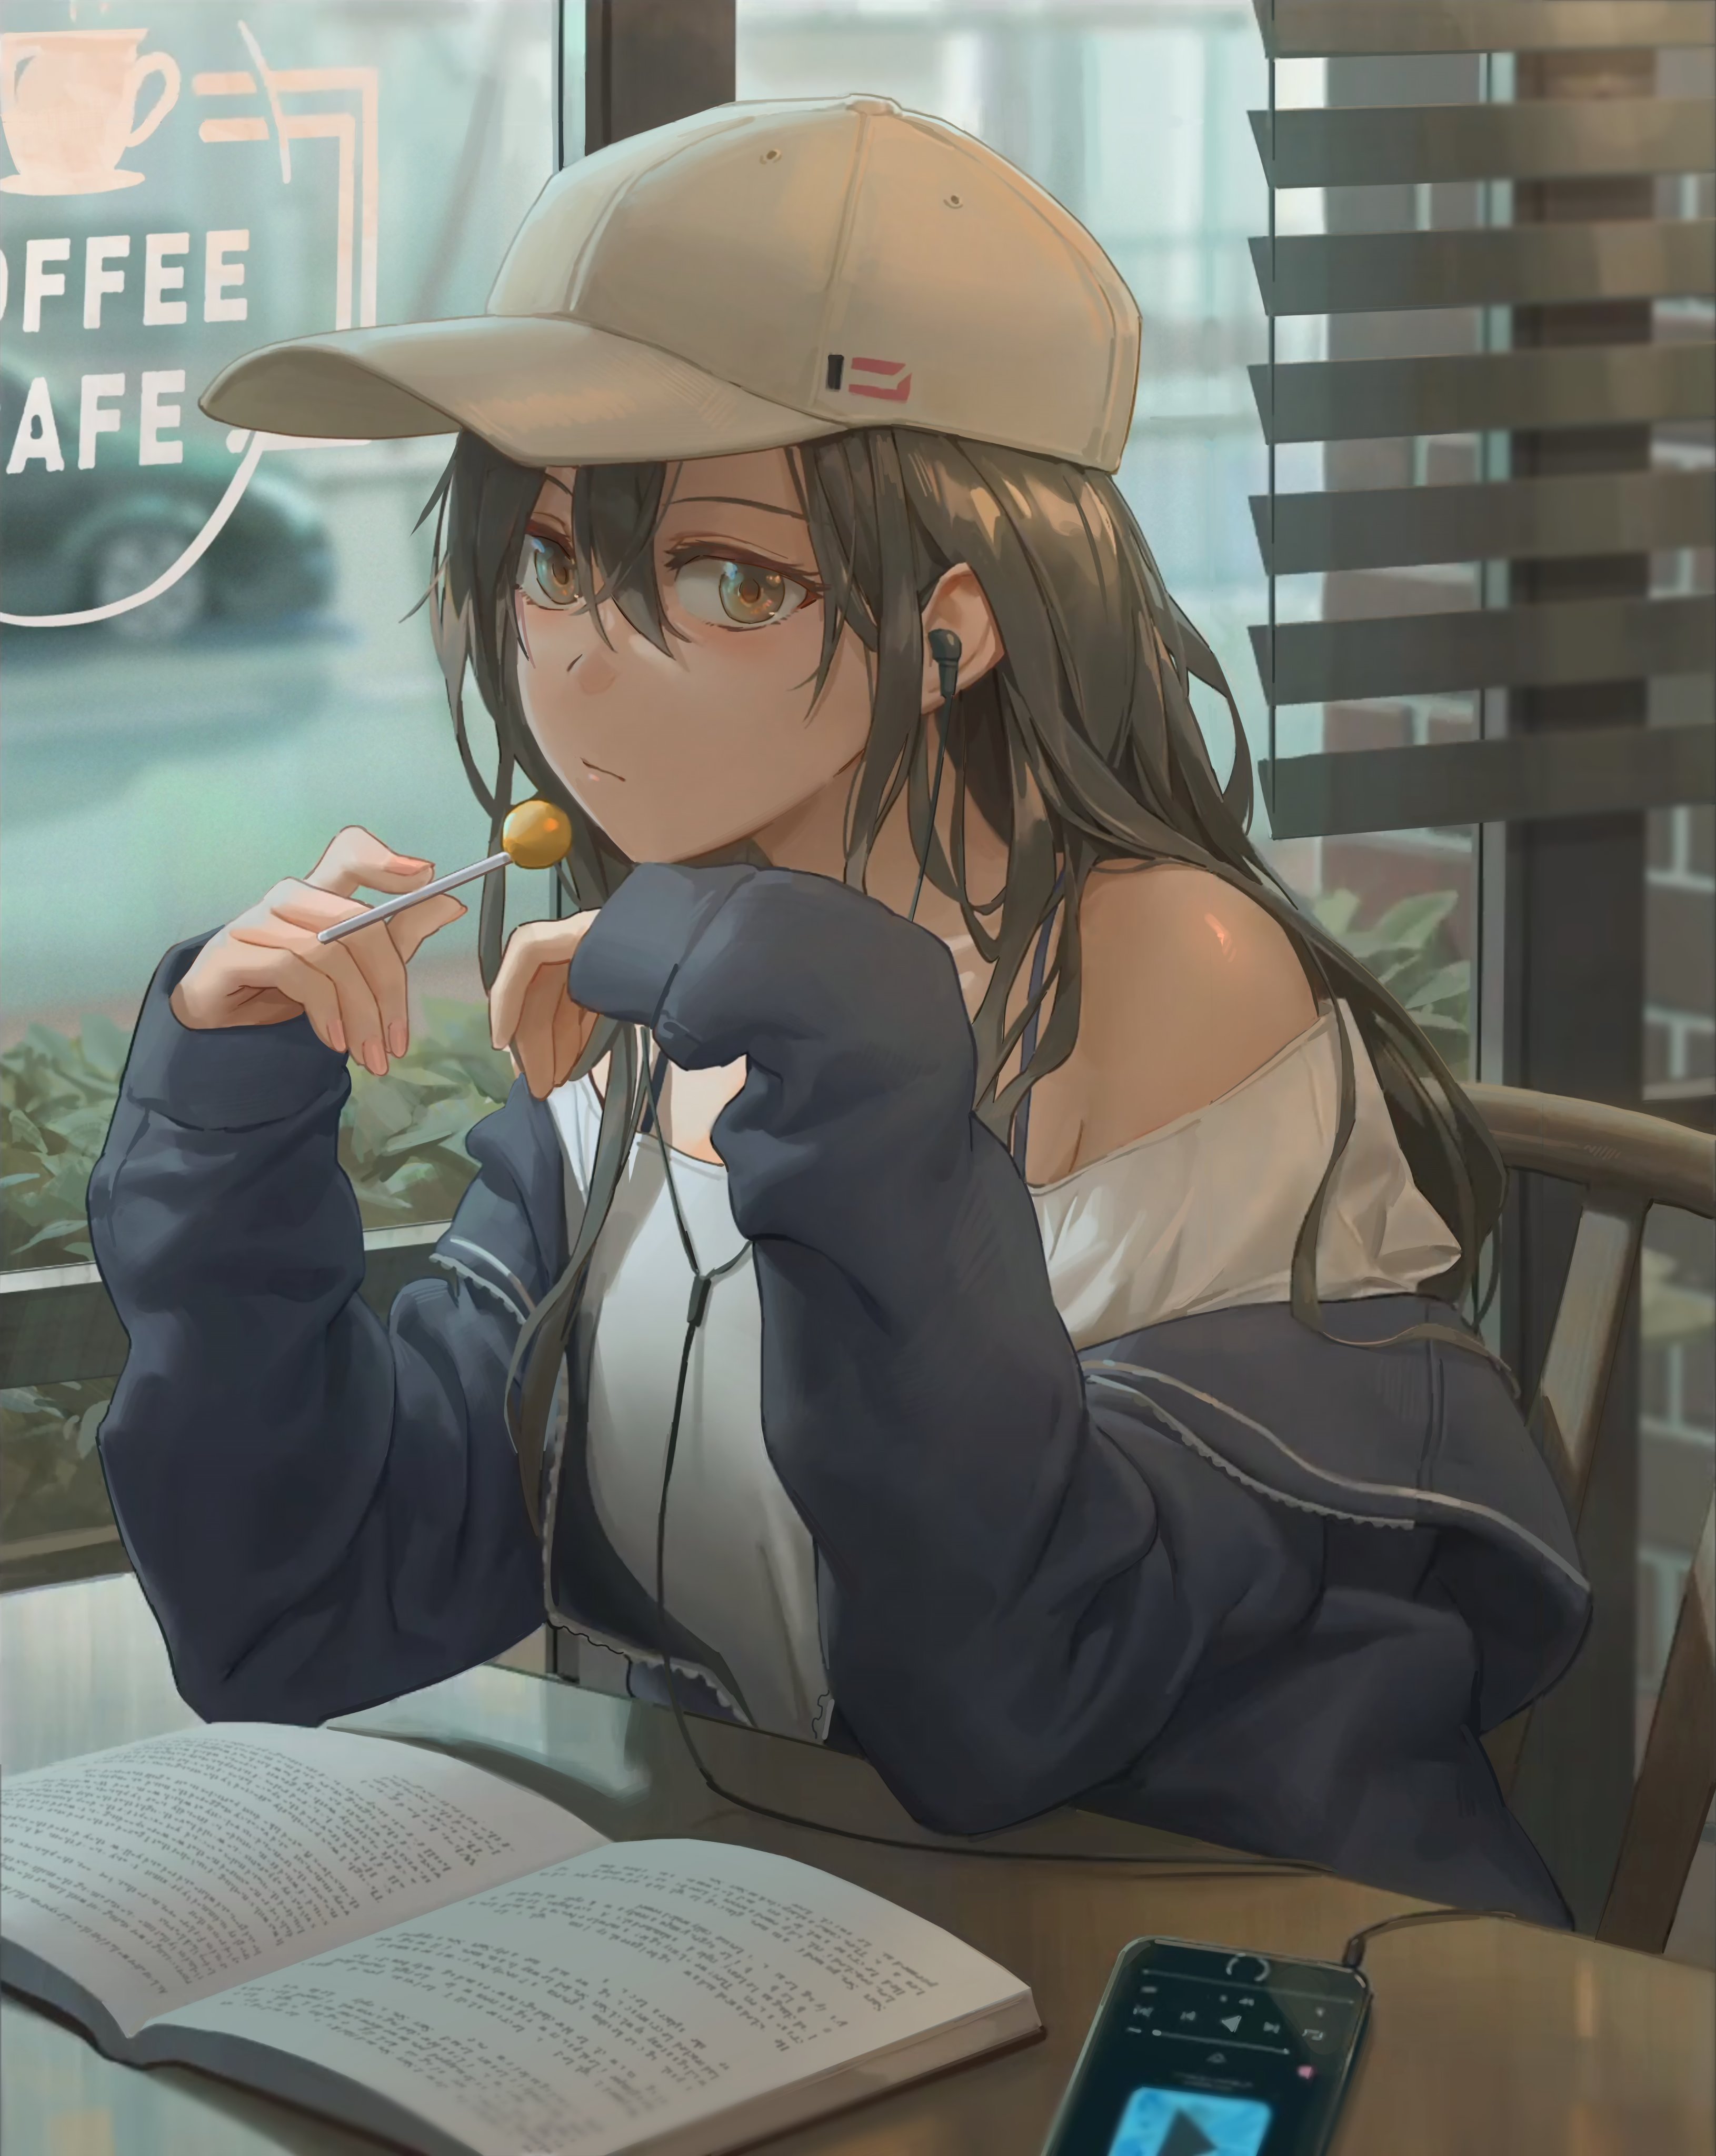 Anime Anime Girls Hat Smartphone Looking At Viewer Sitting Cafe Long Hair Blue Hoodie Lollipop Books 3260x4096